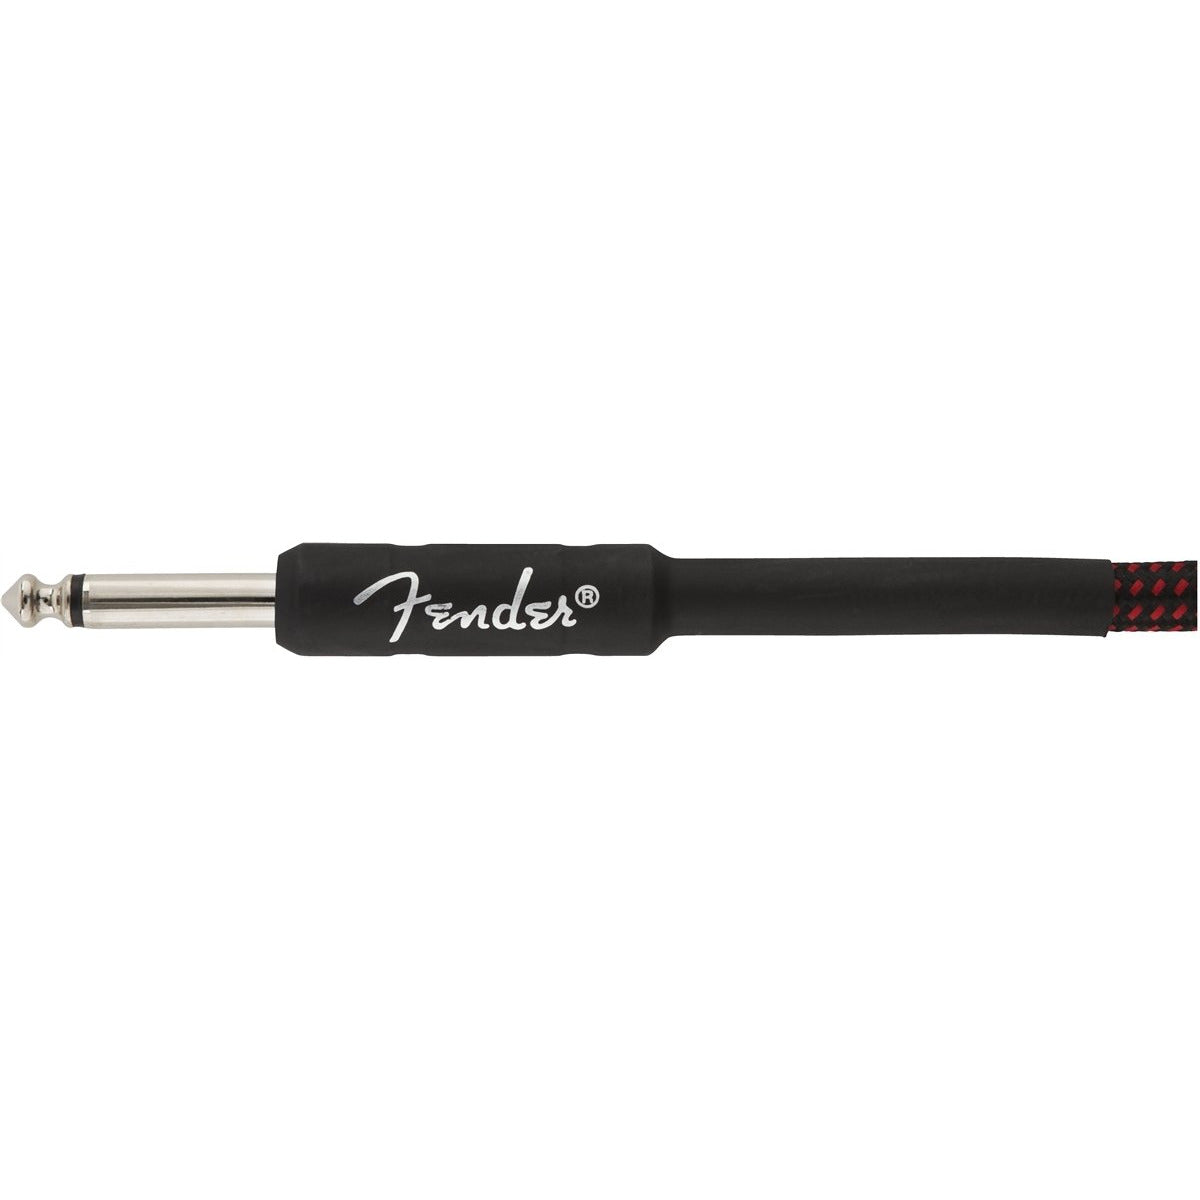 1/4 inch jack of Fender Professional Series Instrument Cable